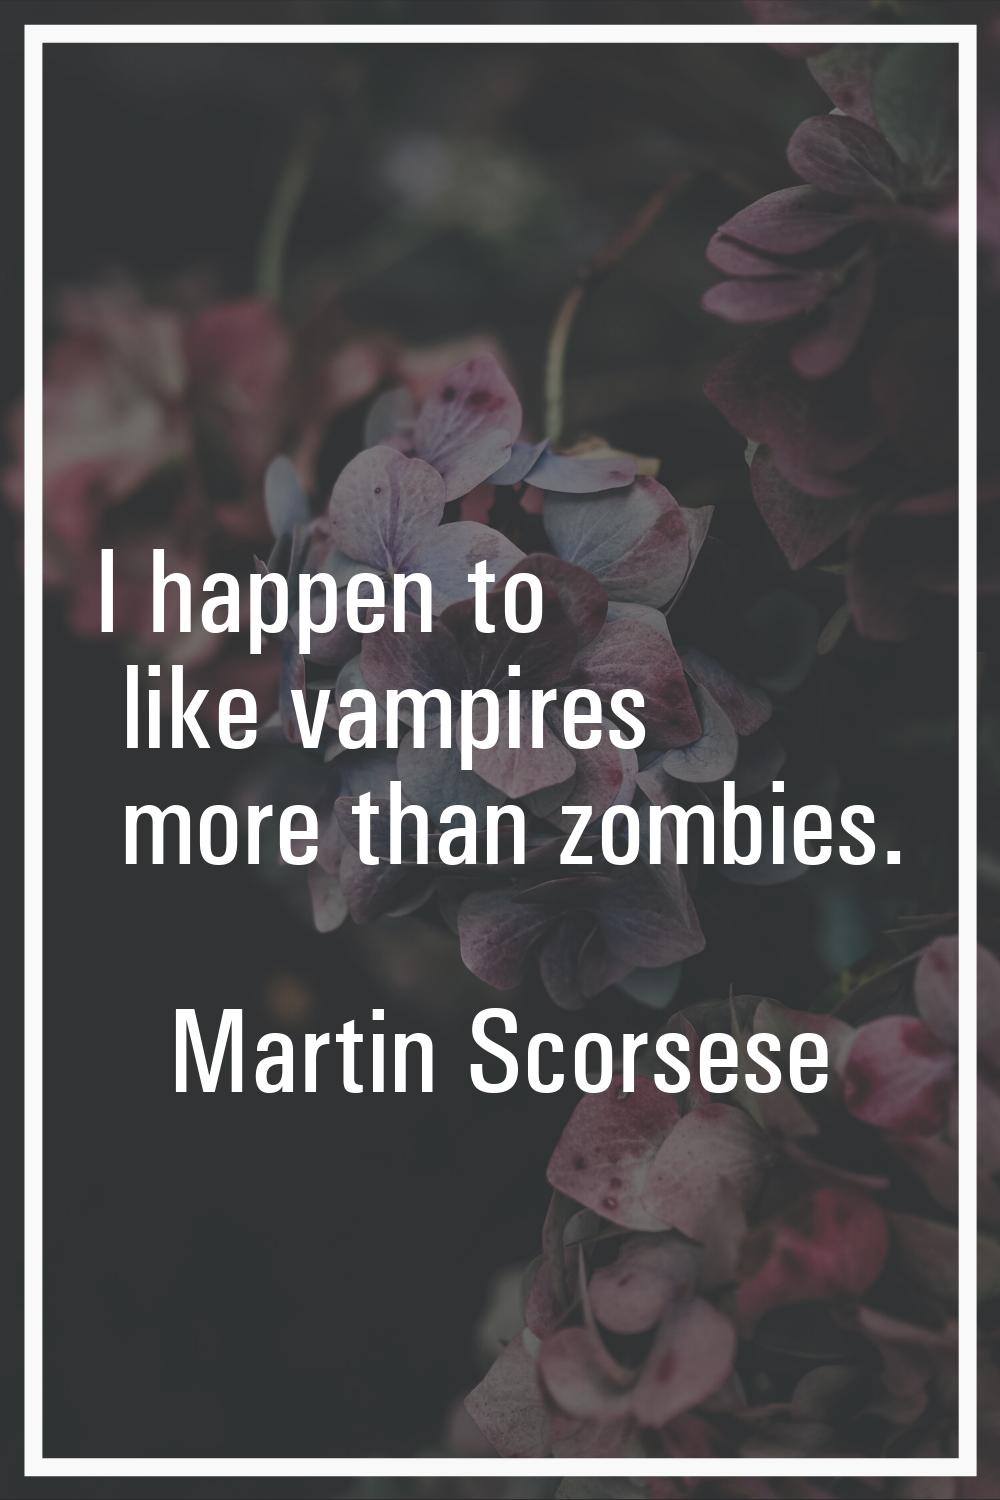 I happen to like vampires more than zombies.